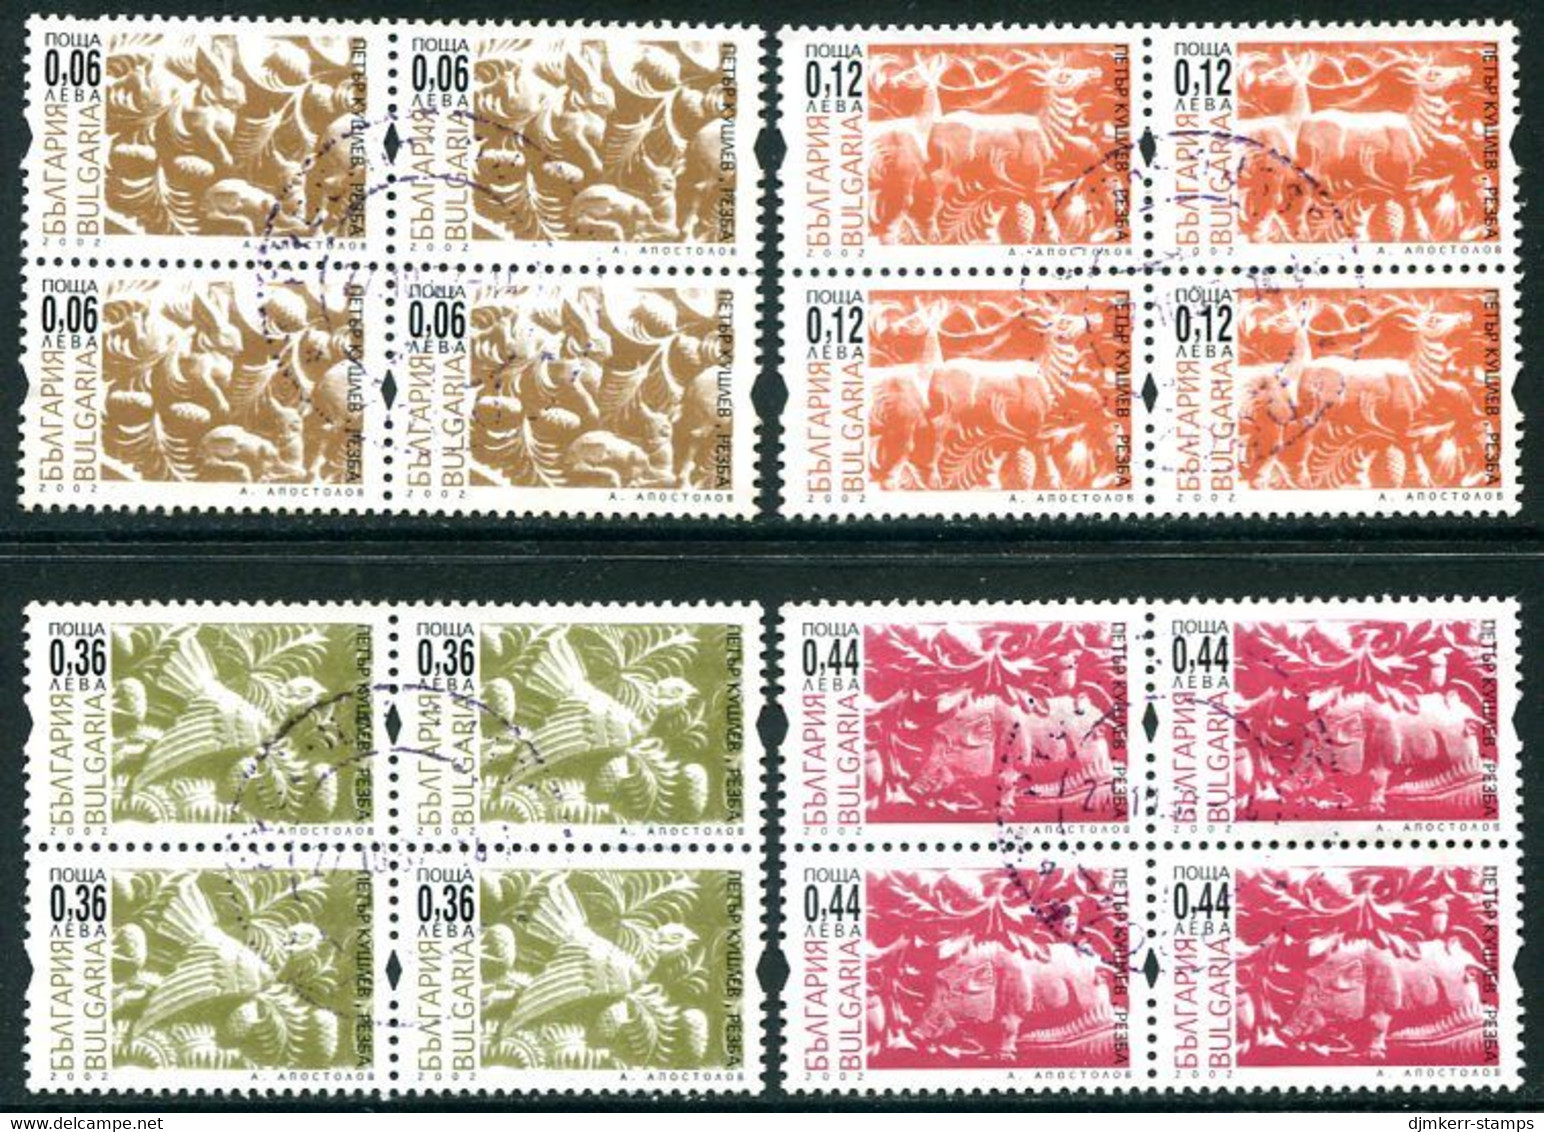 BULGARIA 2002 Kushlev Woodcuts With Security Perforation Used Blocks Of 4.  Michel 4571-74 CS X - Usados